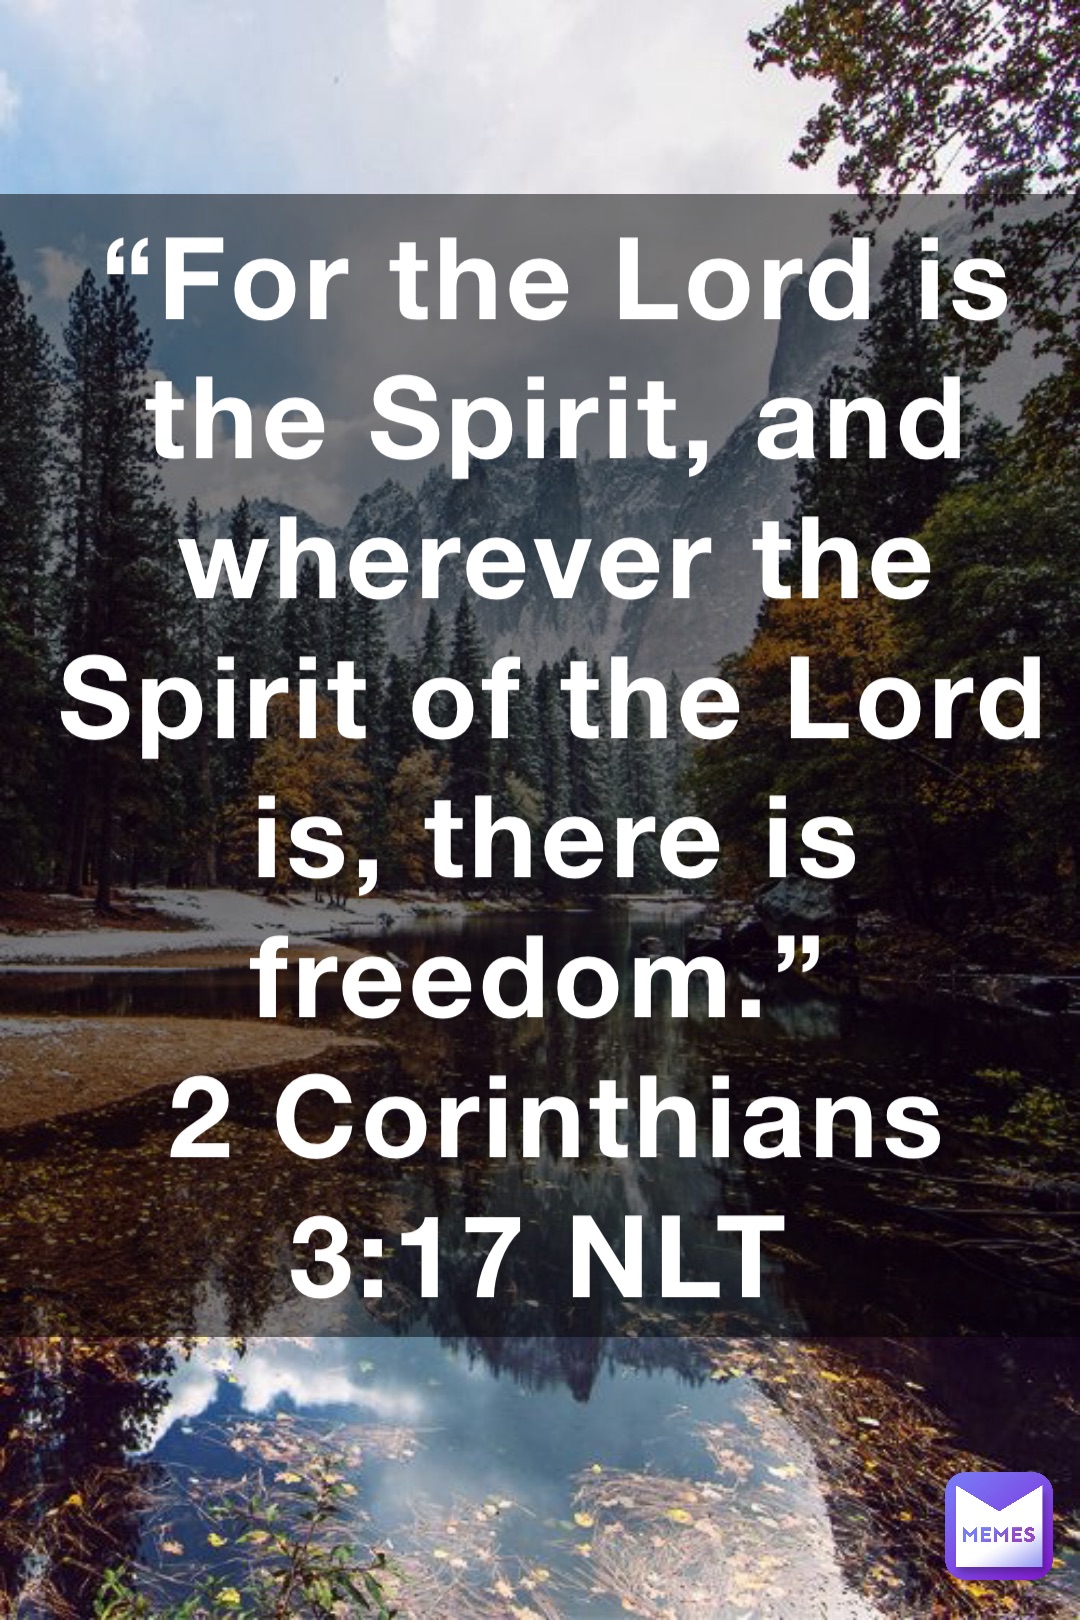 “For the Lord is the Spirit, and wherever the Spirit of the Lord is, there is freedom.”
‭‭2 Corinthians‬ ‭3:17‬ ‭NLT‬‬